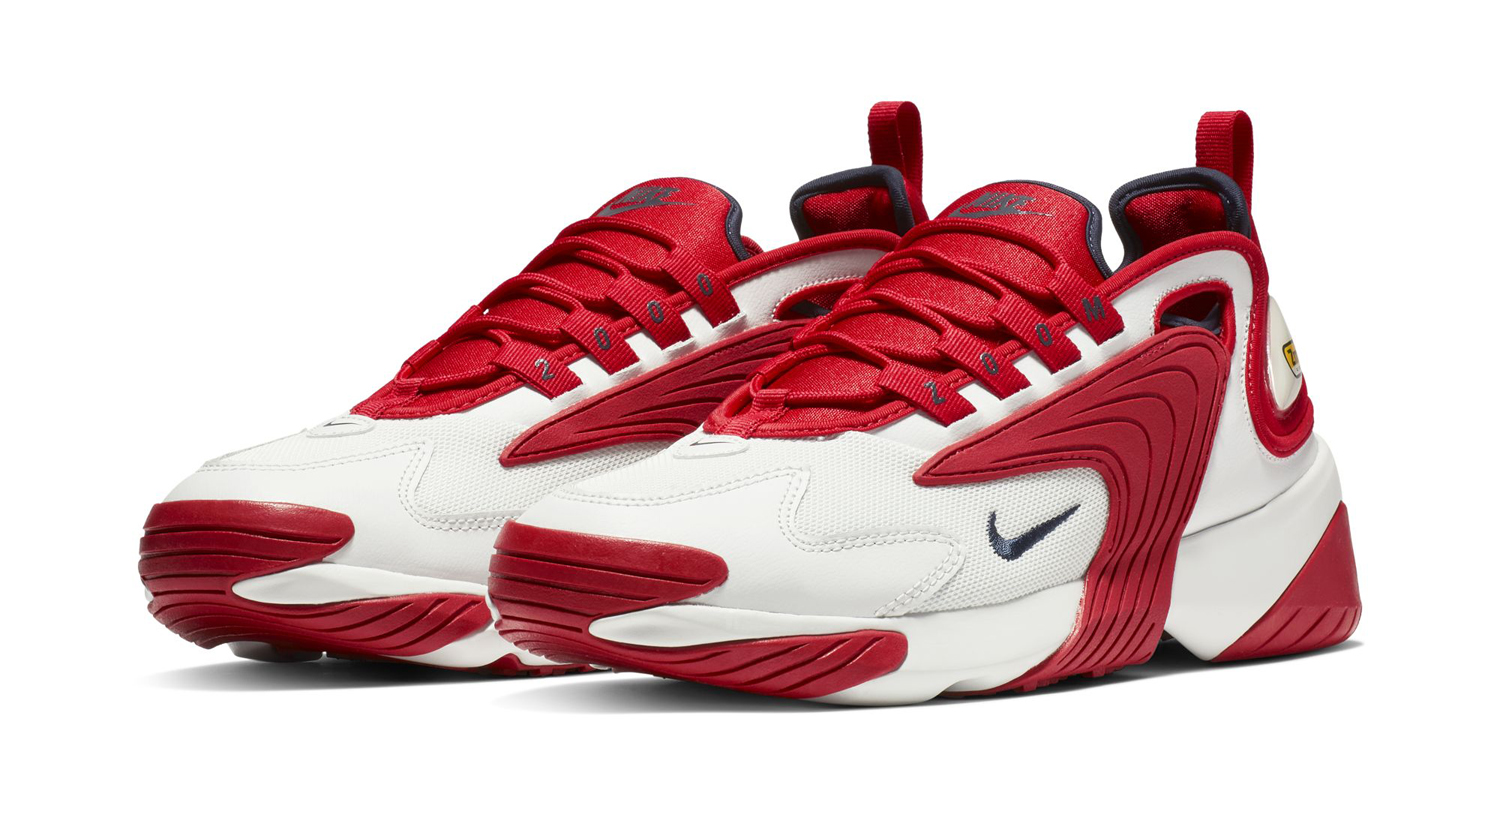 nike zoom red